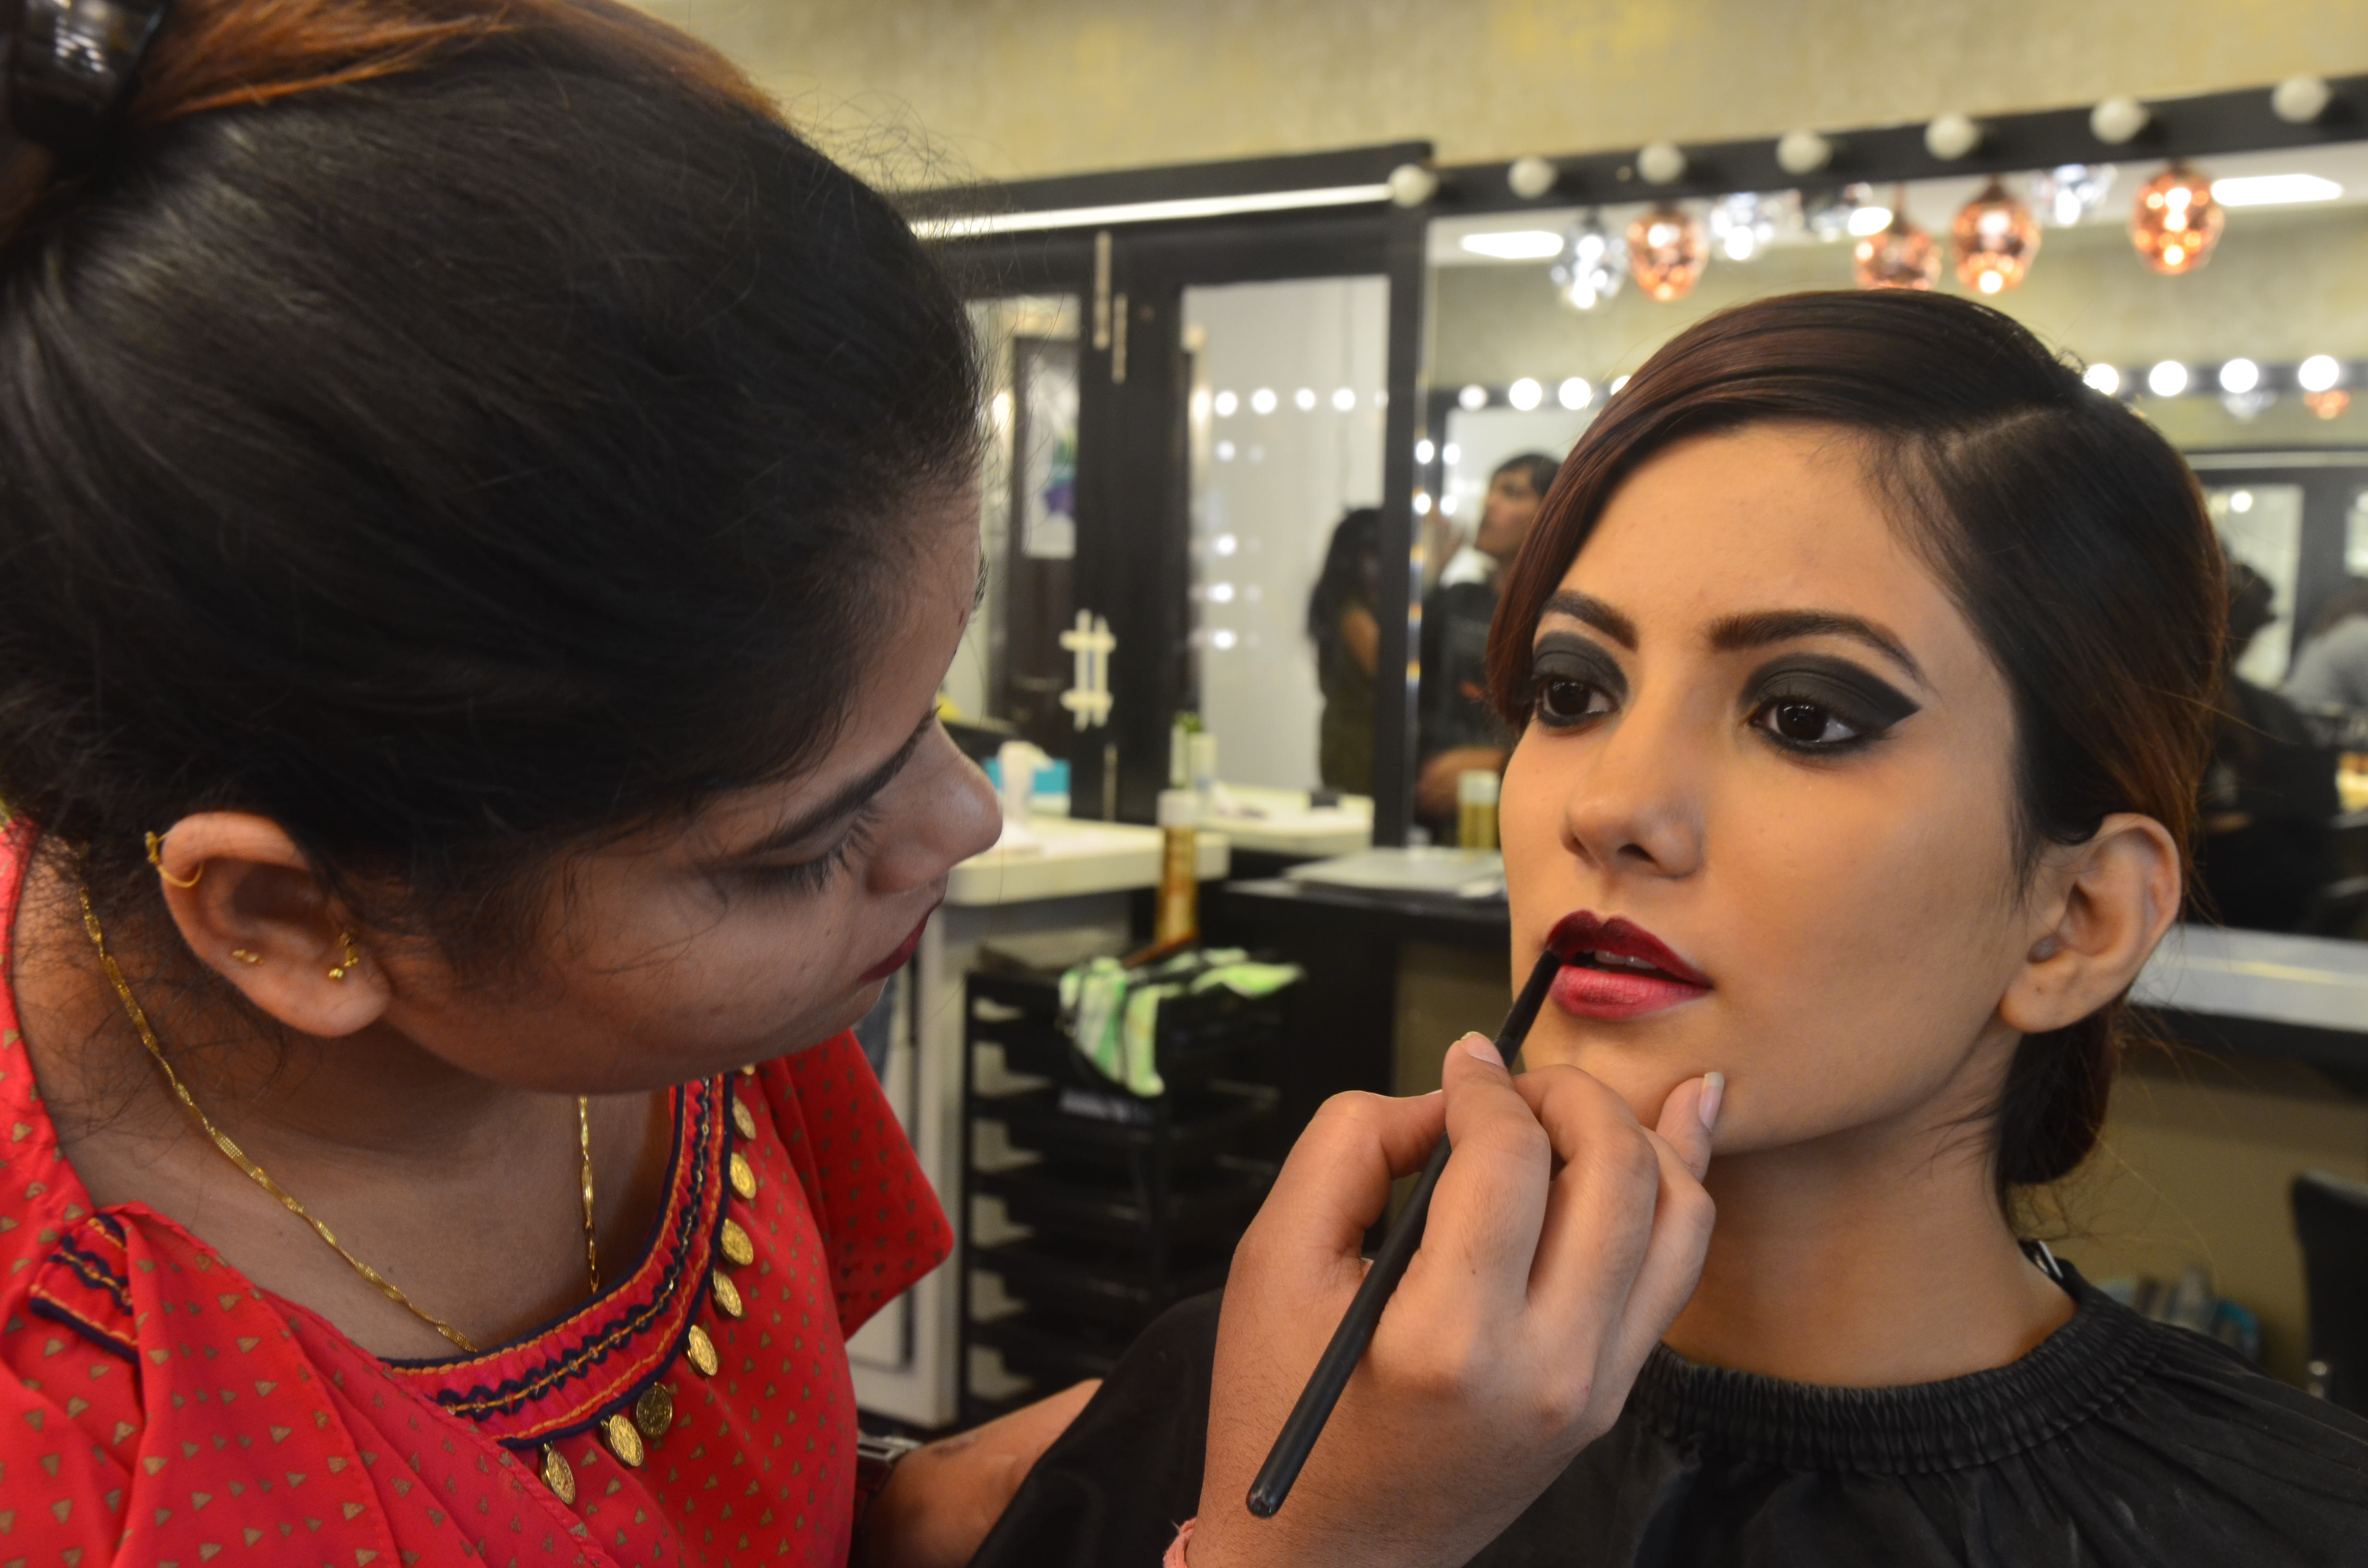 Professional Makeup Course To Build Your Career In The Makeup Industry